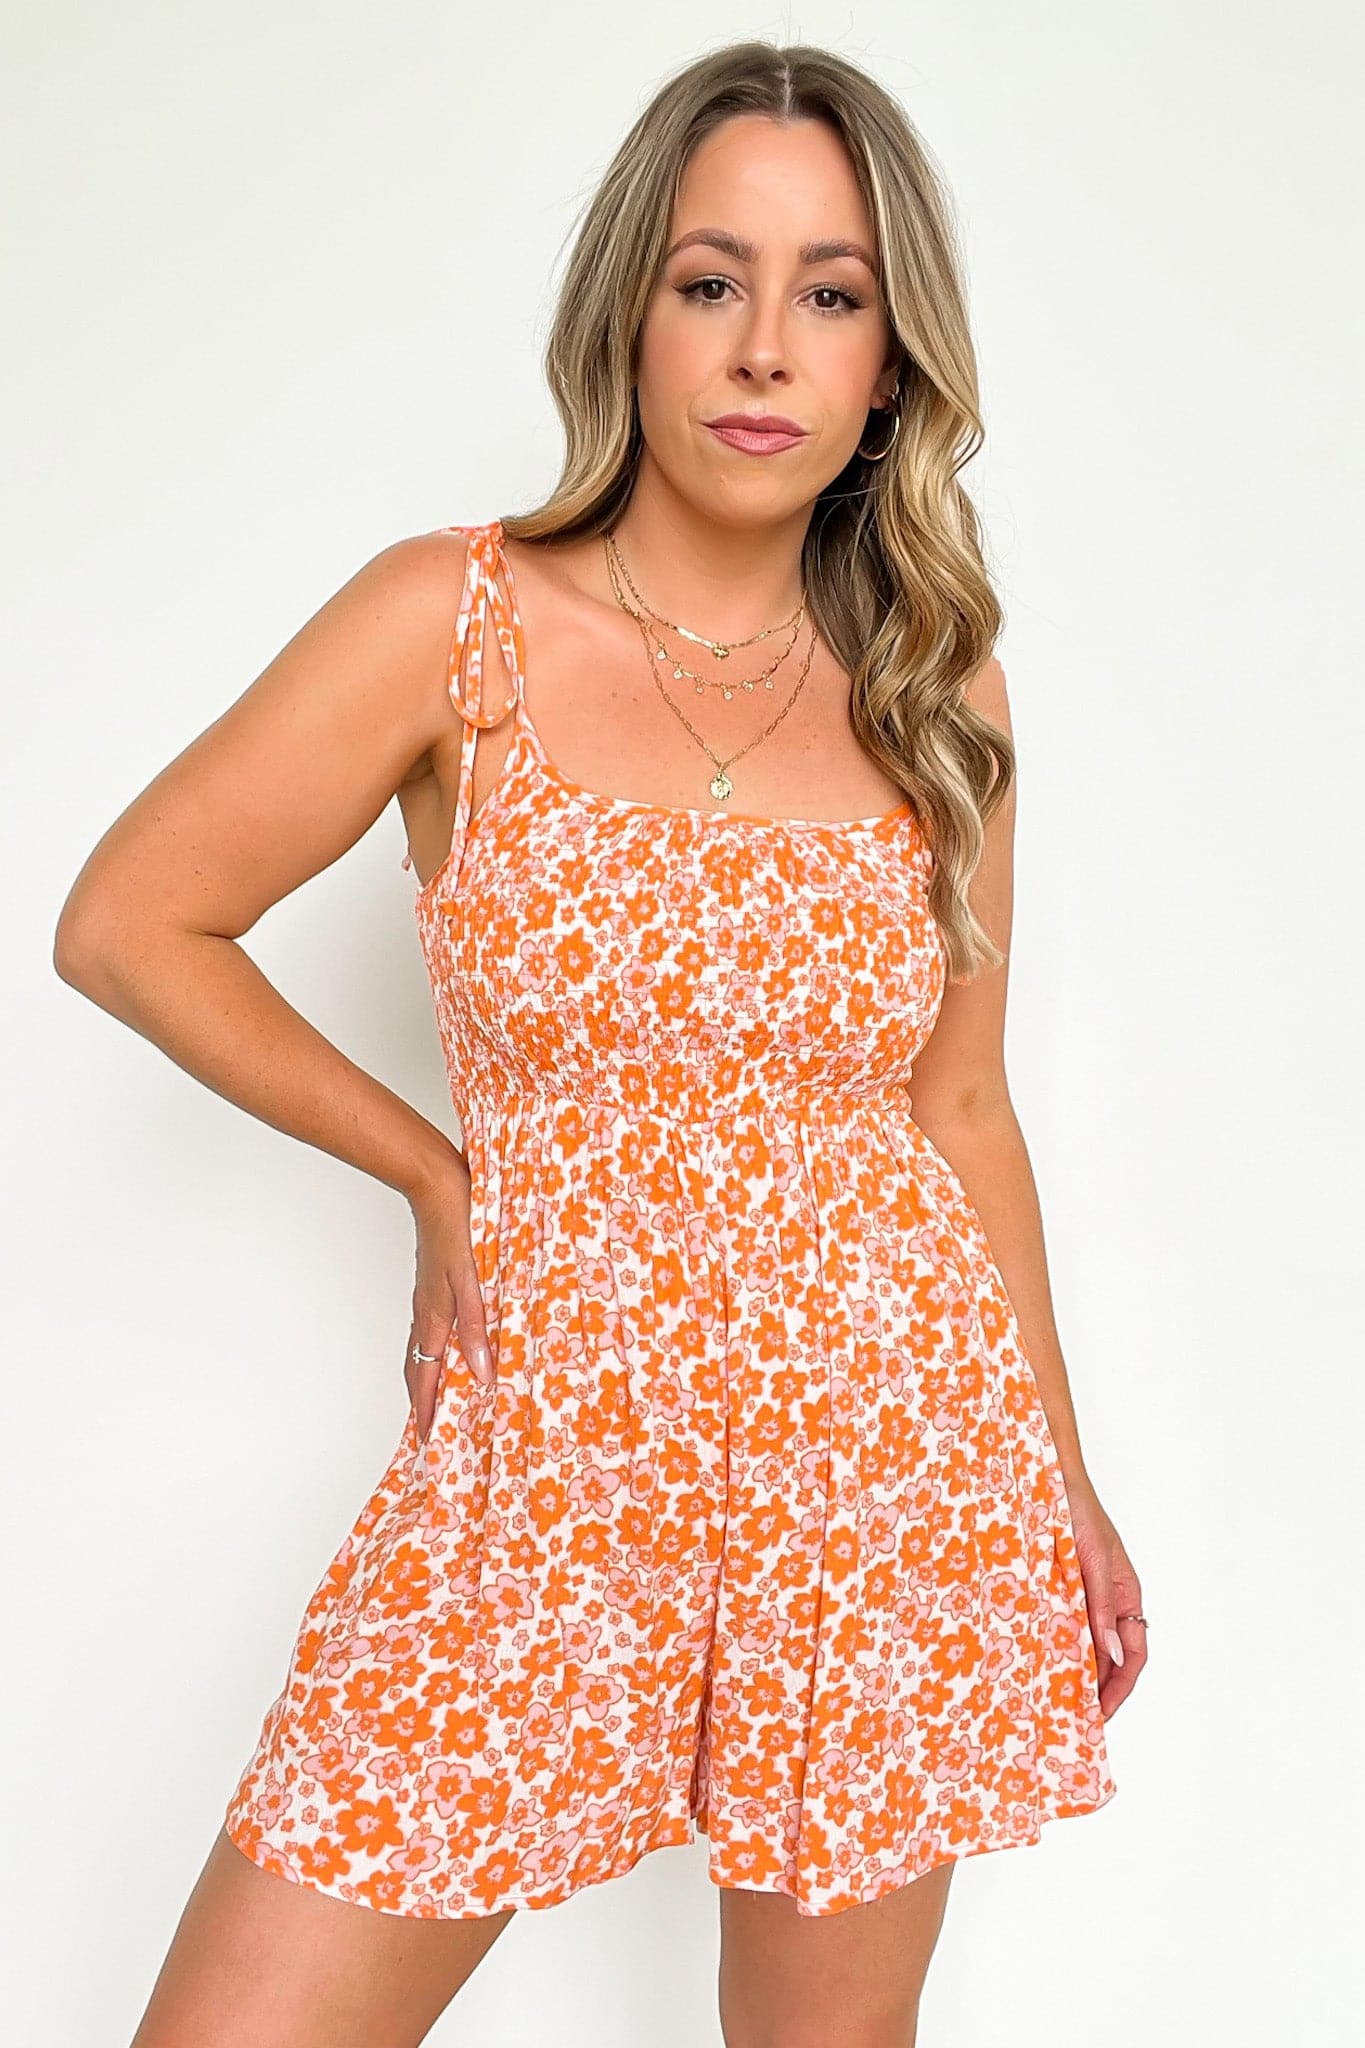  Jazlyn Floral Tie Strap Romper - FINAL SALE - Madison and Mallory